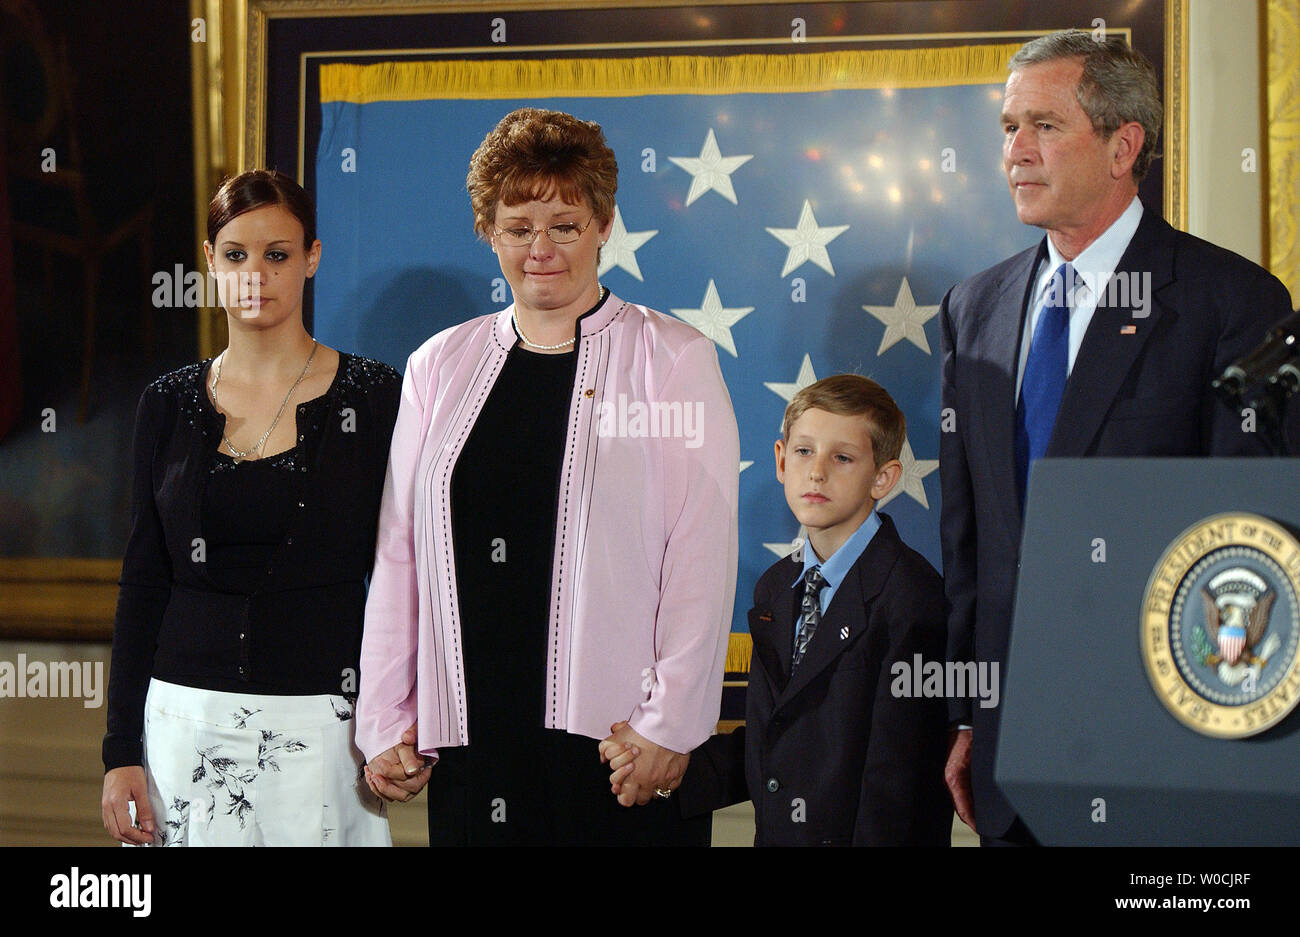 Jessica, Brigit and David Smith (l to r), the family of Army Sgt. 1st Class Paul  Ray Smith, and U.S. President George W. Bush listen as a citation is read  bestowing the